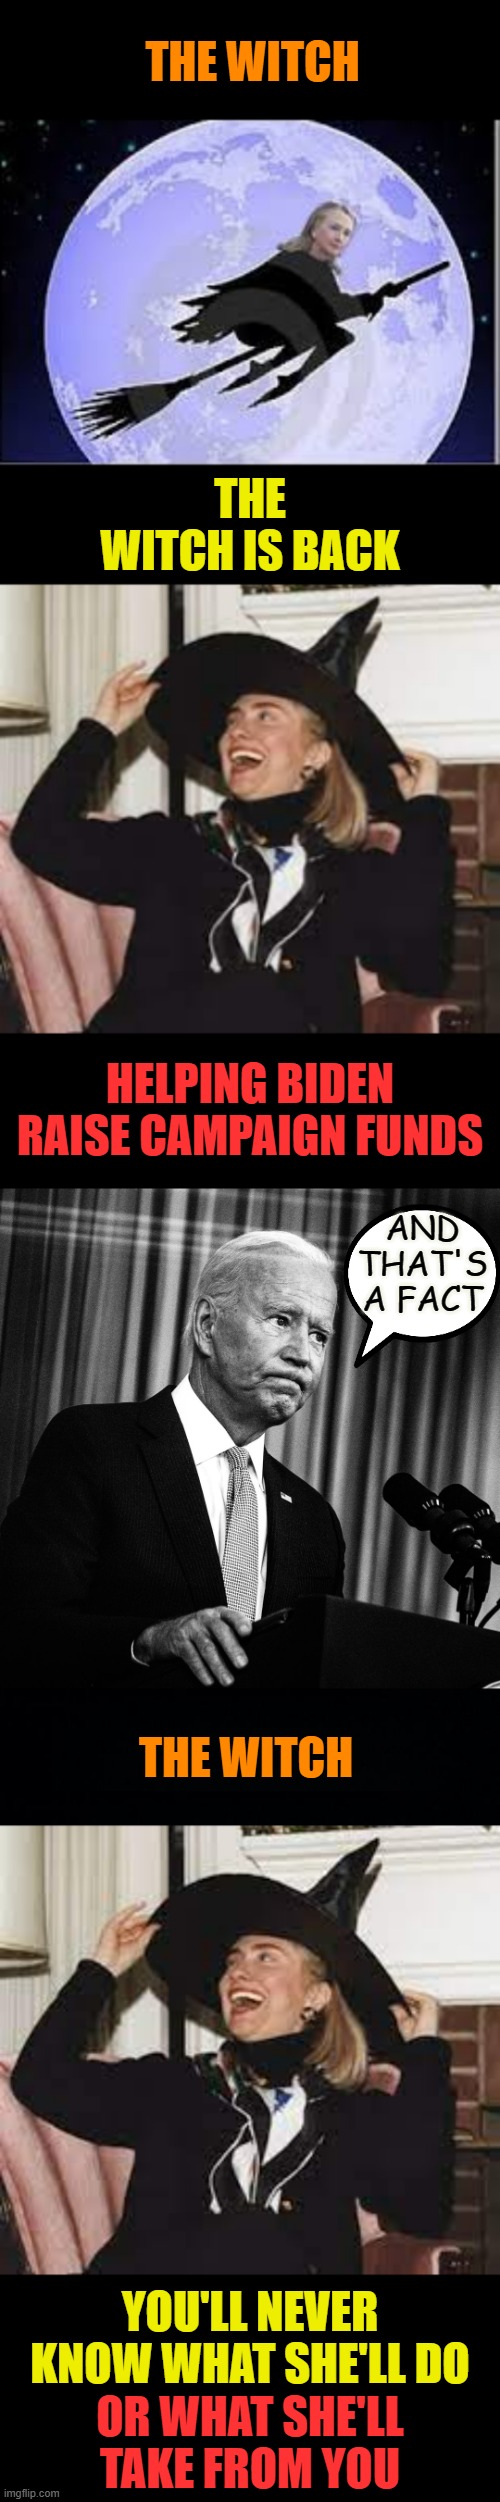 The Witch | THE WITCH; THE WITCH IS BACK; HELPING BIDEN RAISE CAMPAIGN FUNDS; AND THAT'S A FACT; THE WITCH; YOU'LL NEVER KNOW WHAT SHE'LL DO; OR WHAT SHE'LL TAKE FROM YOU | image tagged in memes,hillary clinton,make money,joe biden,campaign,payback | made w/ Imgflip meme maker